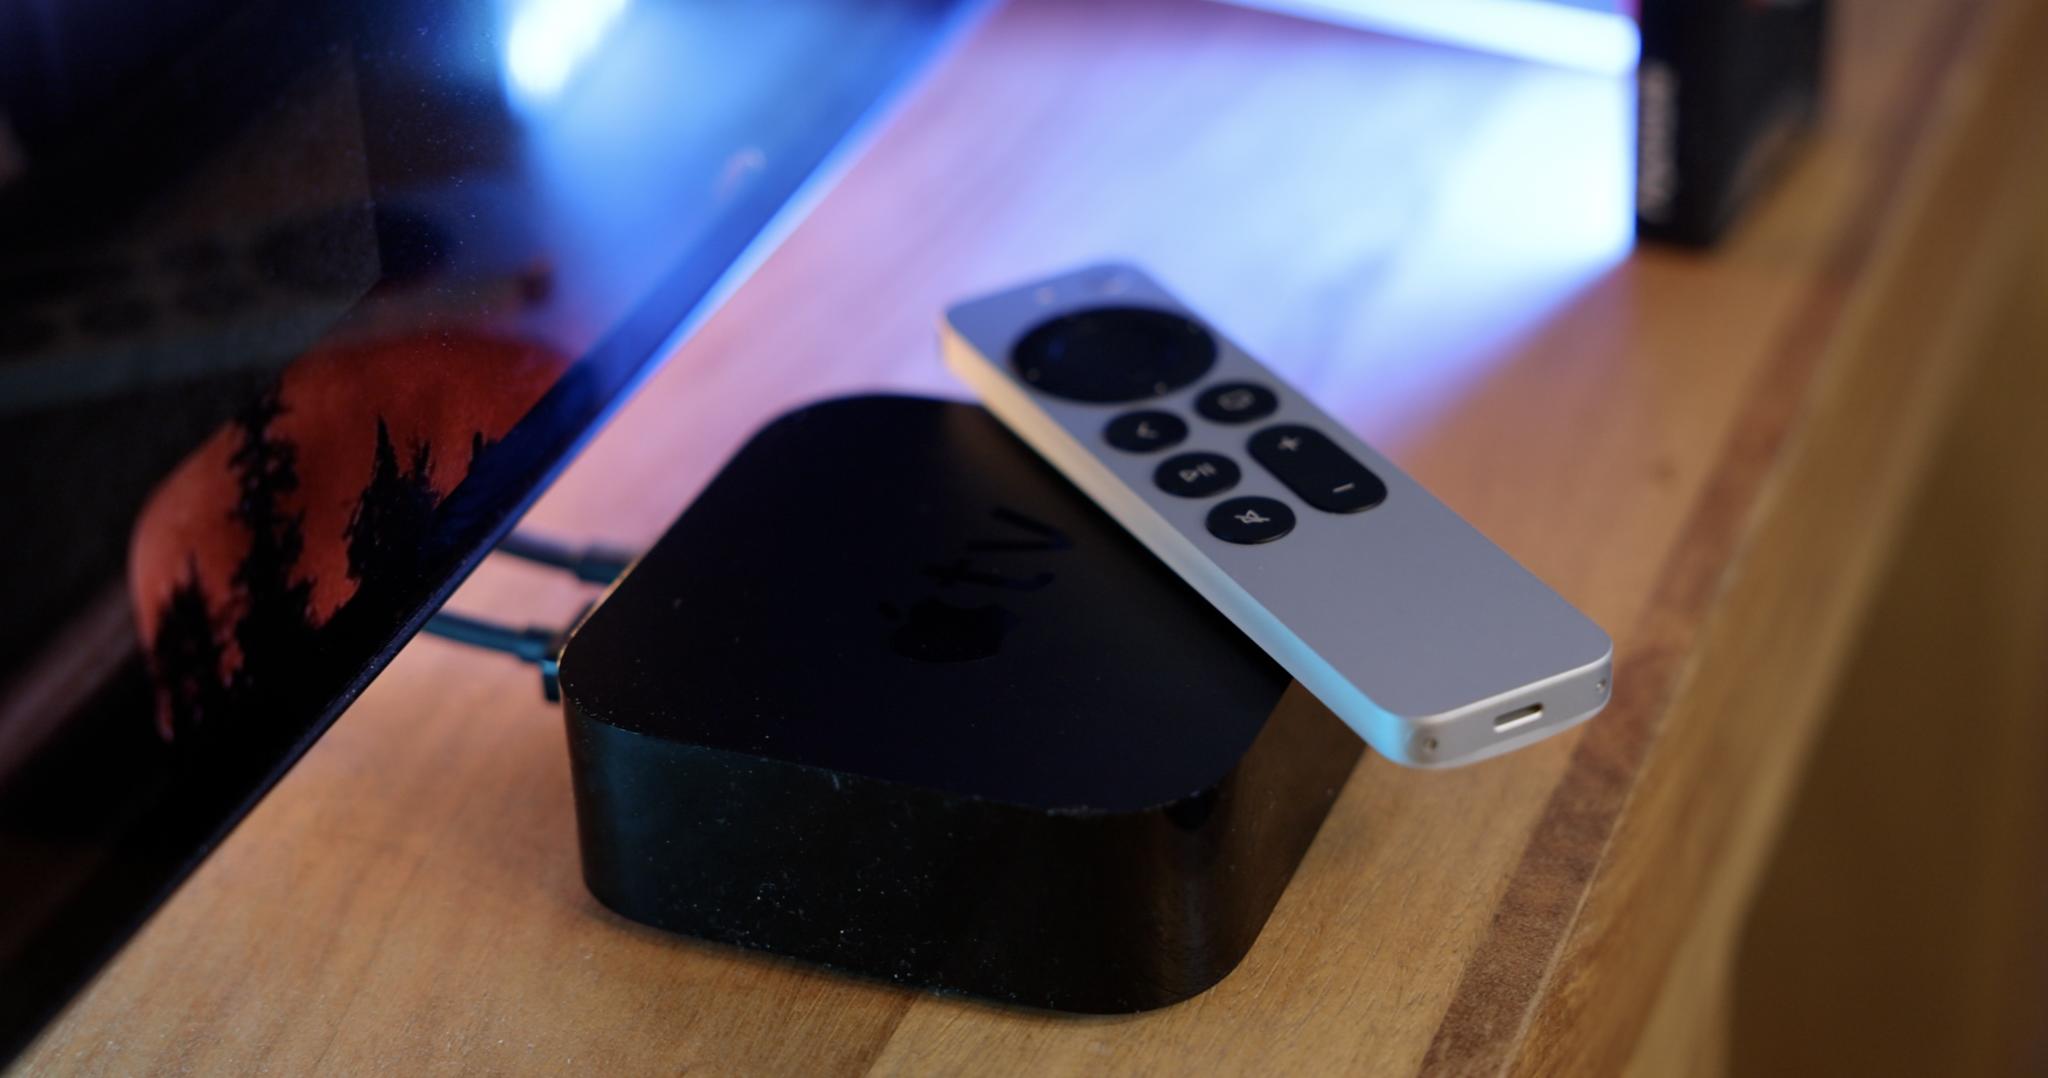 UK streamer NOW app to work on the 2nd gen. Apple TV 4K | iMore